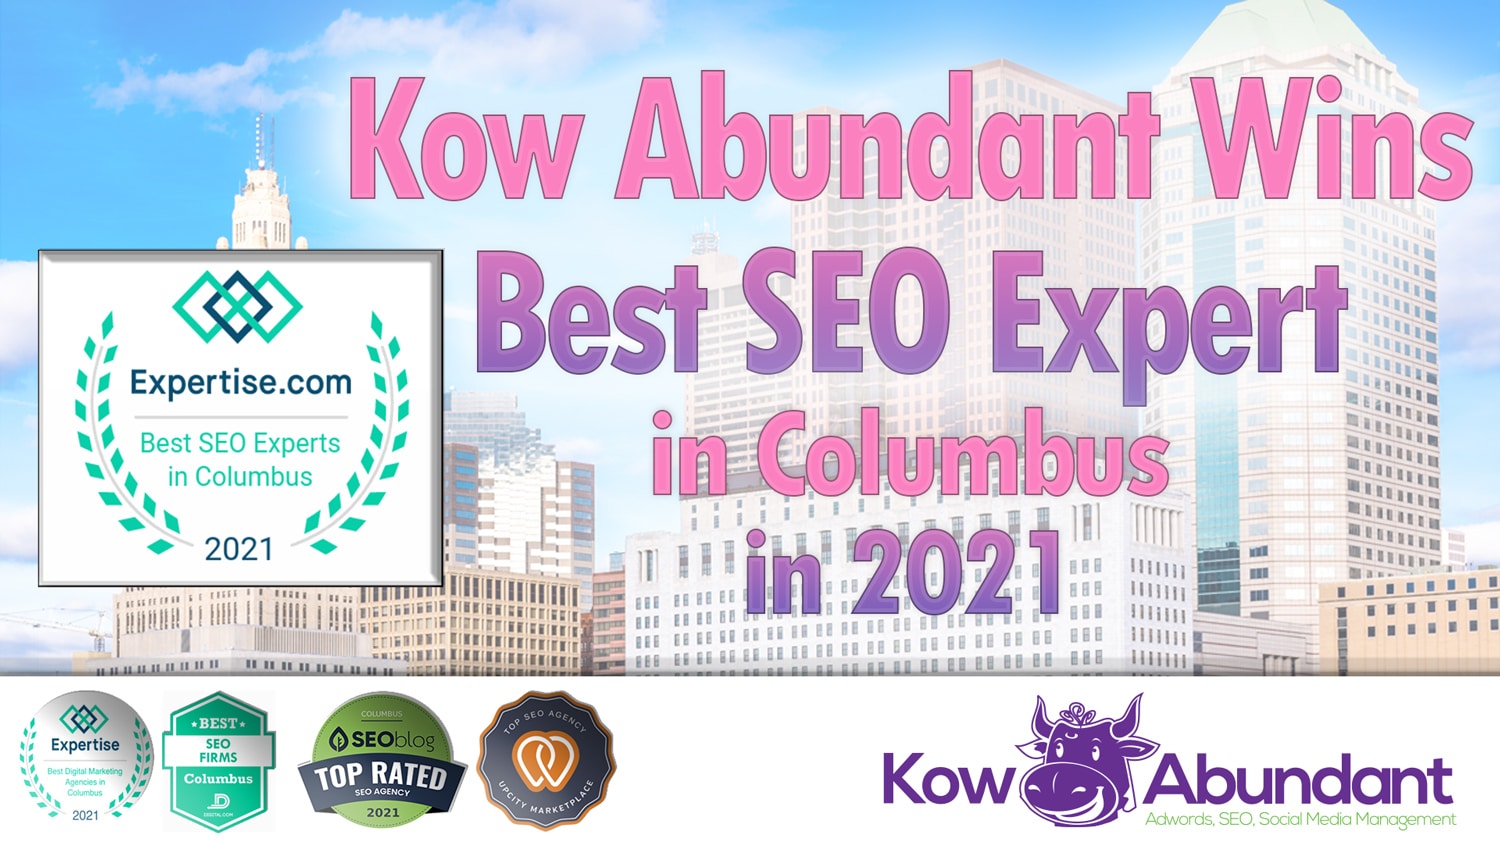 Pictured is a backdrop of downtown Columbus Ohio skyscrapers with text that reads Kow Abundant Wins Best SEO Expert Award in Columbus in 2021 along with an image of the Expertise.com award with roselands on each side, a prestigious award for the young growing agency in Columbus.